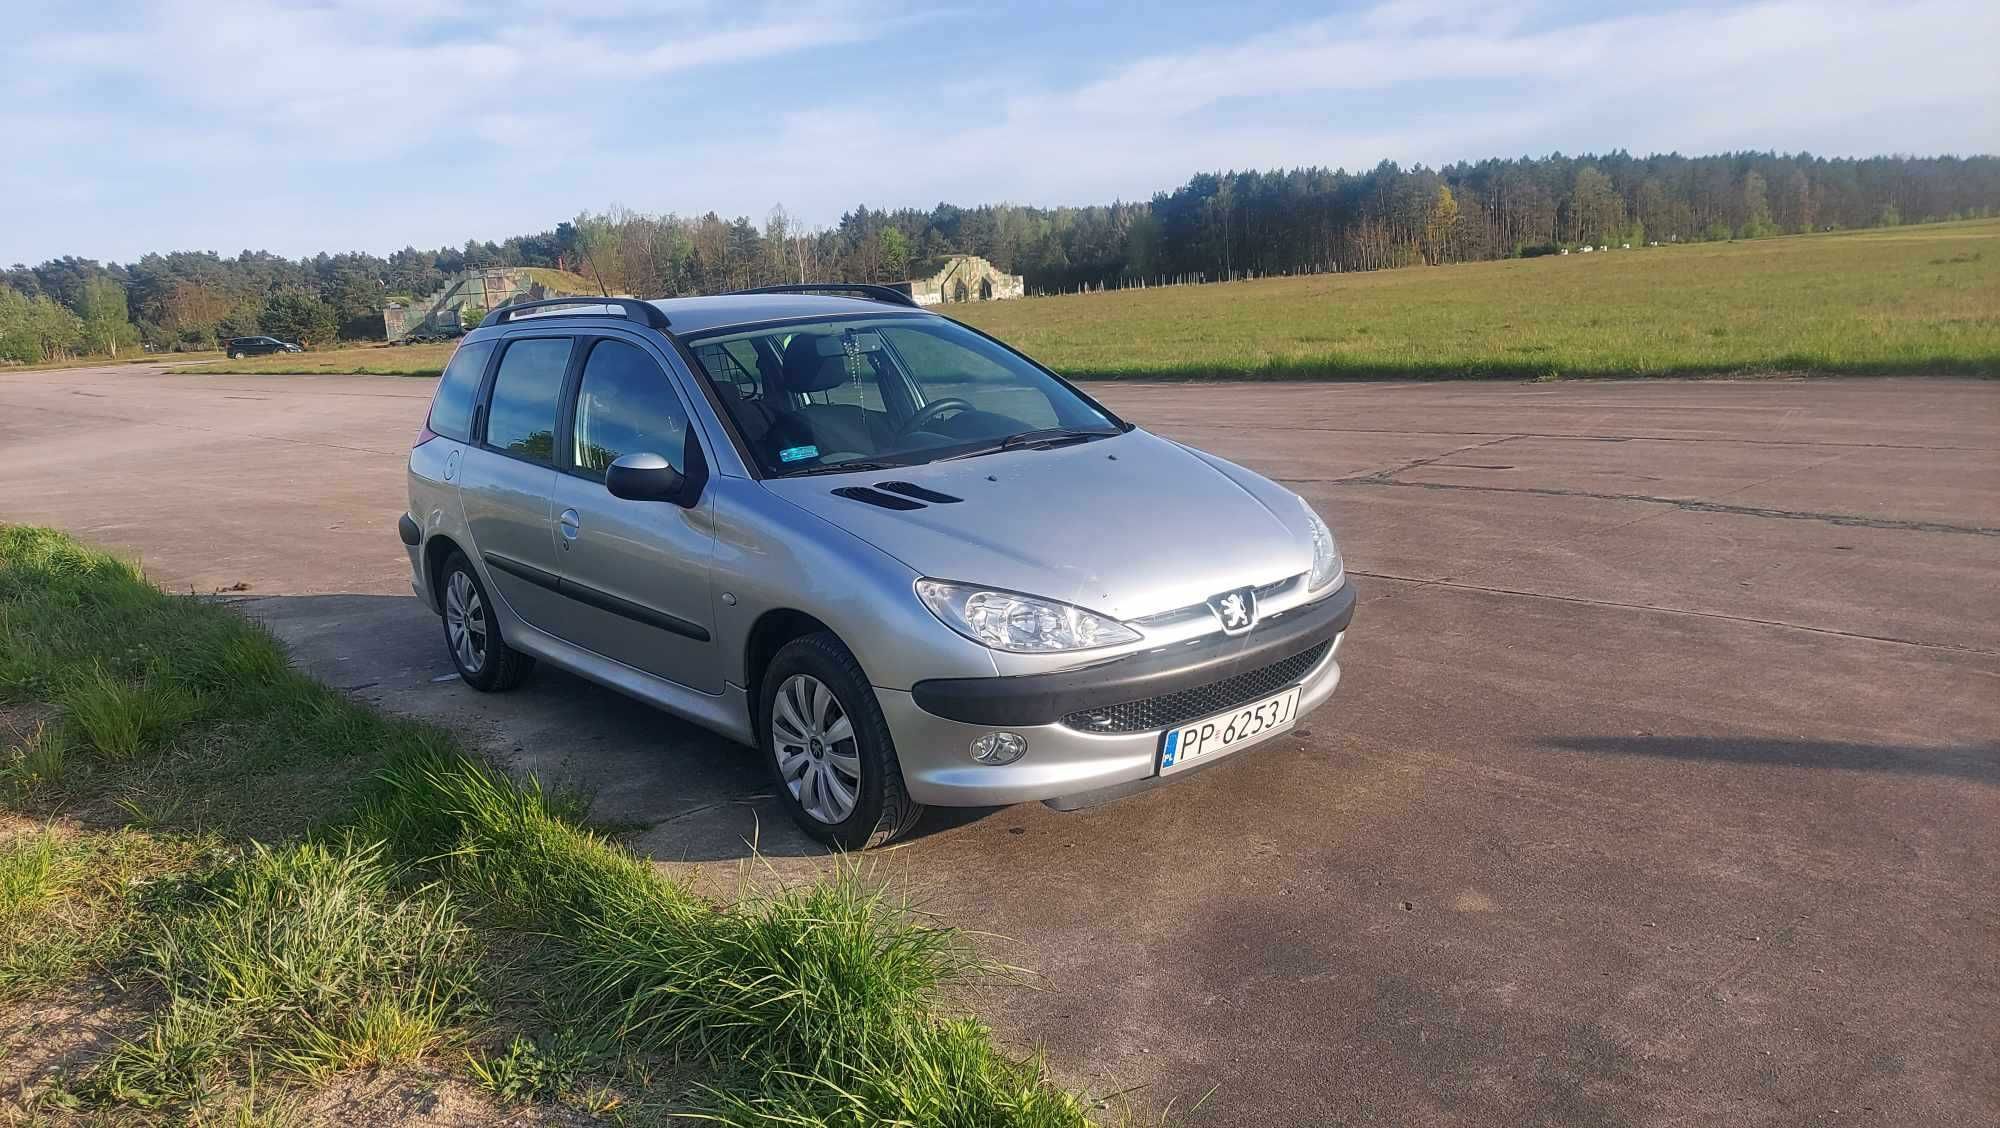 Peugeot 206 SW 1.1 benzyna - 2003 r.